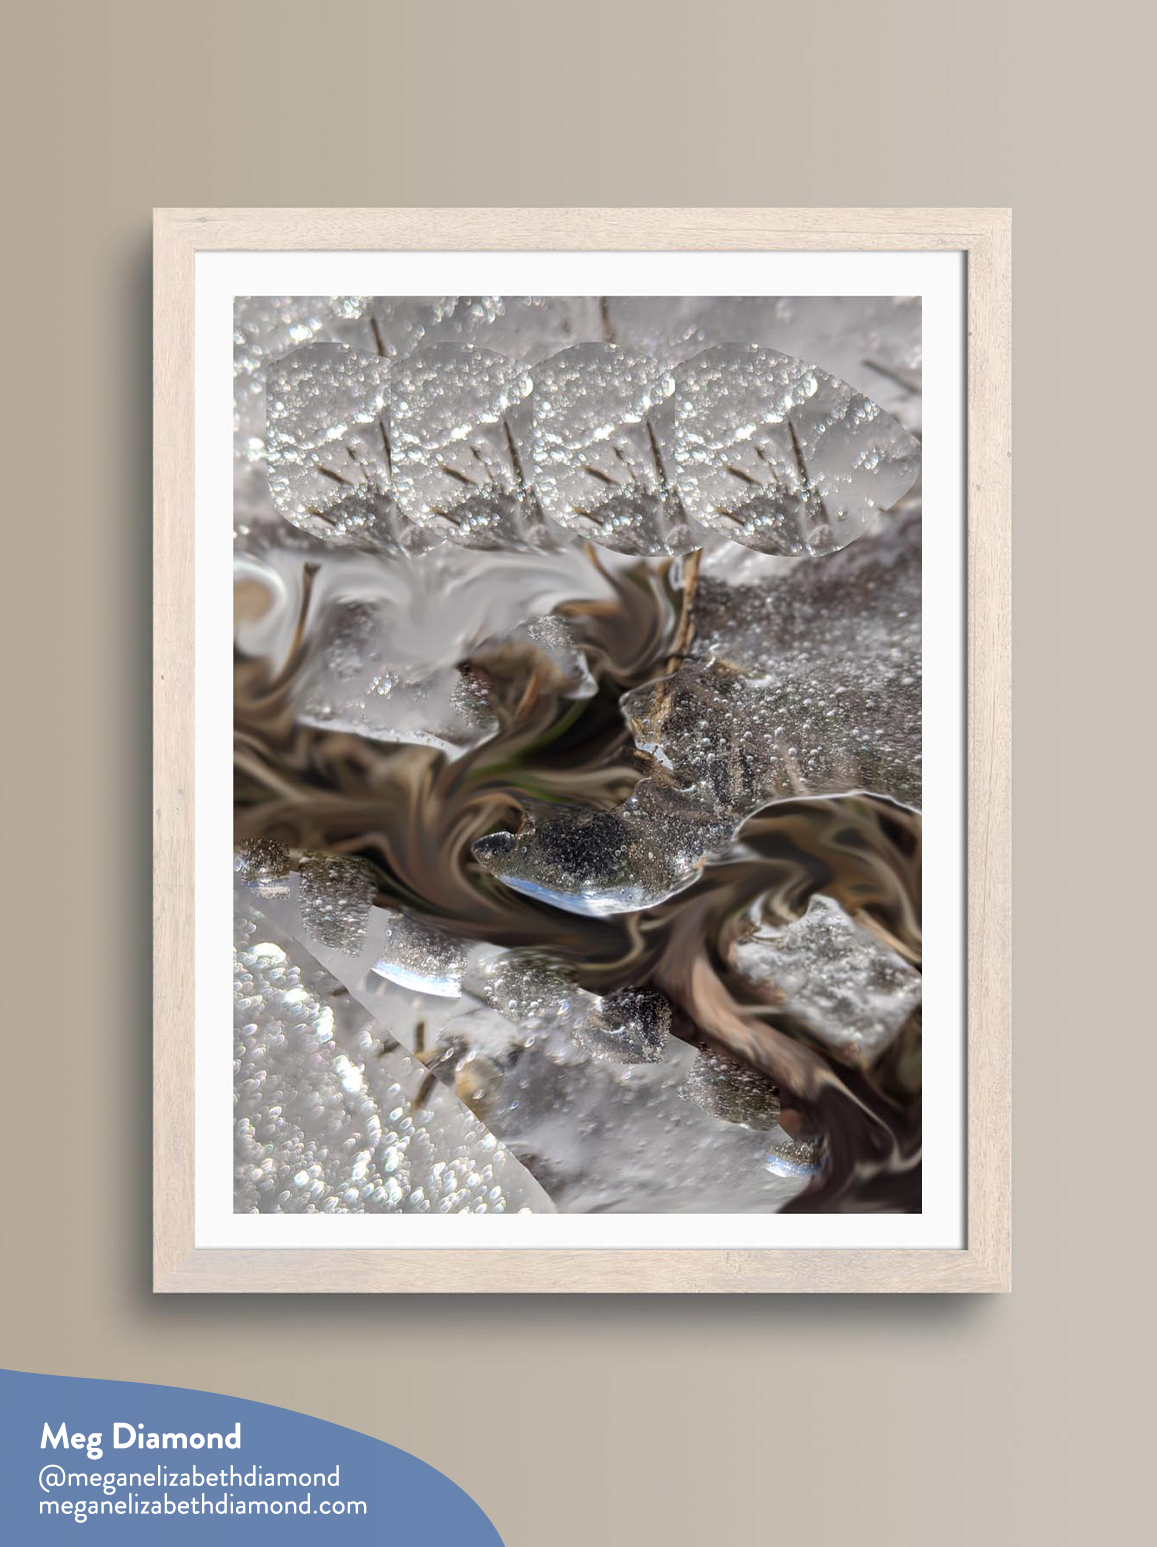 Cropped portrait photo of collage artwork framed in a light wood frame by Meg Diamond, features imagery of ice and earth swirled together like a whirlpool. The image has a watermark with Meg’s name, instagram handle (@meganelizabethdiamond) and website (meganelizabethdiamond.com)